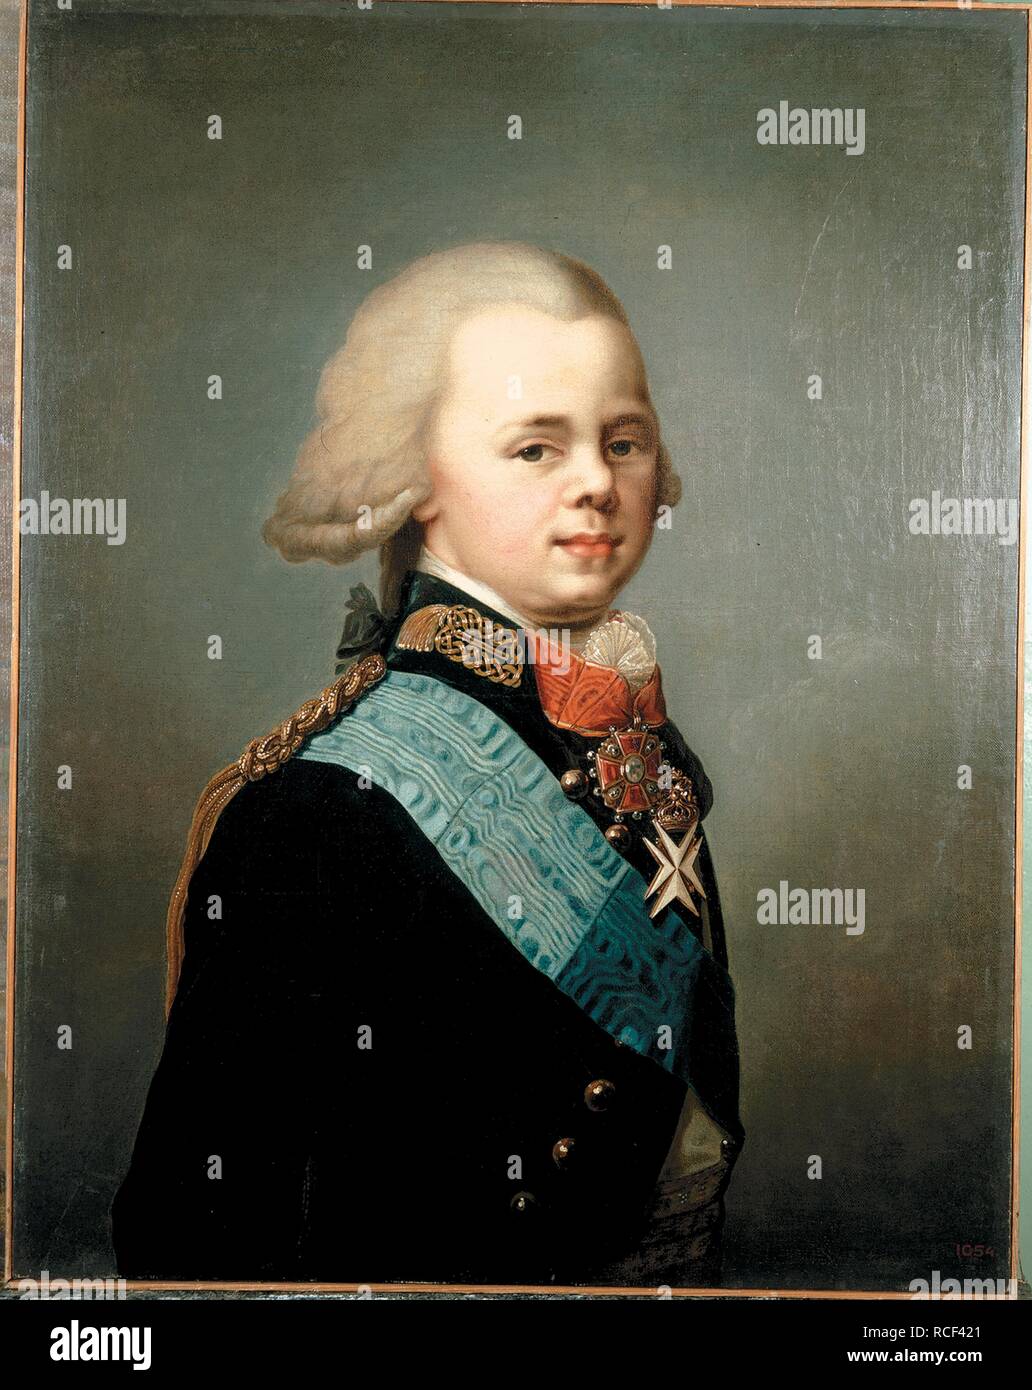 Portrait of Grand Duke Constantine Pavlovich of Russia (1779-1831). Museum: State Russian Museum, St. Petersburg. Author: Lampi, Johann-Baptist, the Younger. Stock Photo